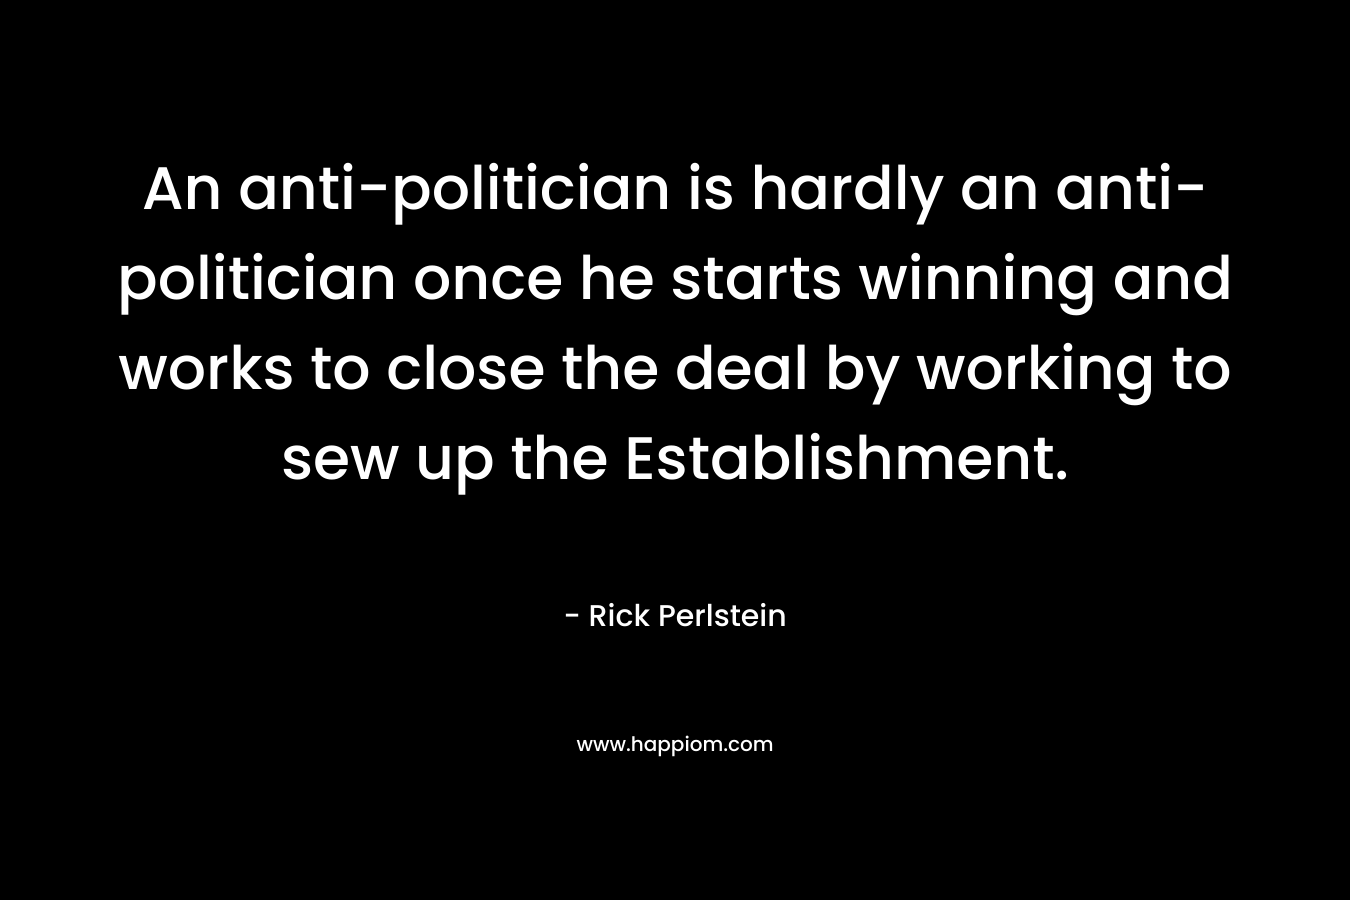 An anti-politician is hardly an anti-politician once he starts winning and works to close the deal by working to sew up the Establishment. – Rick Perlstein